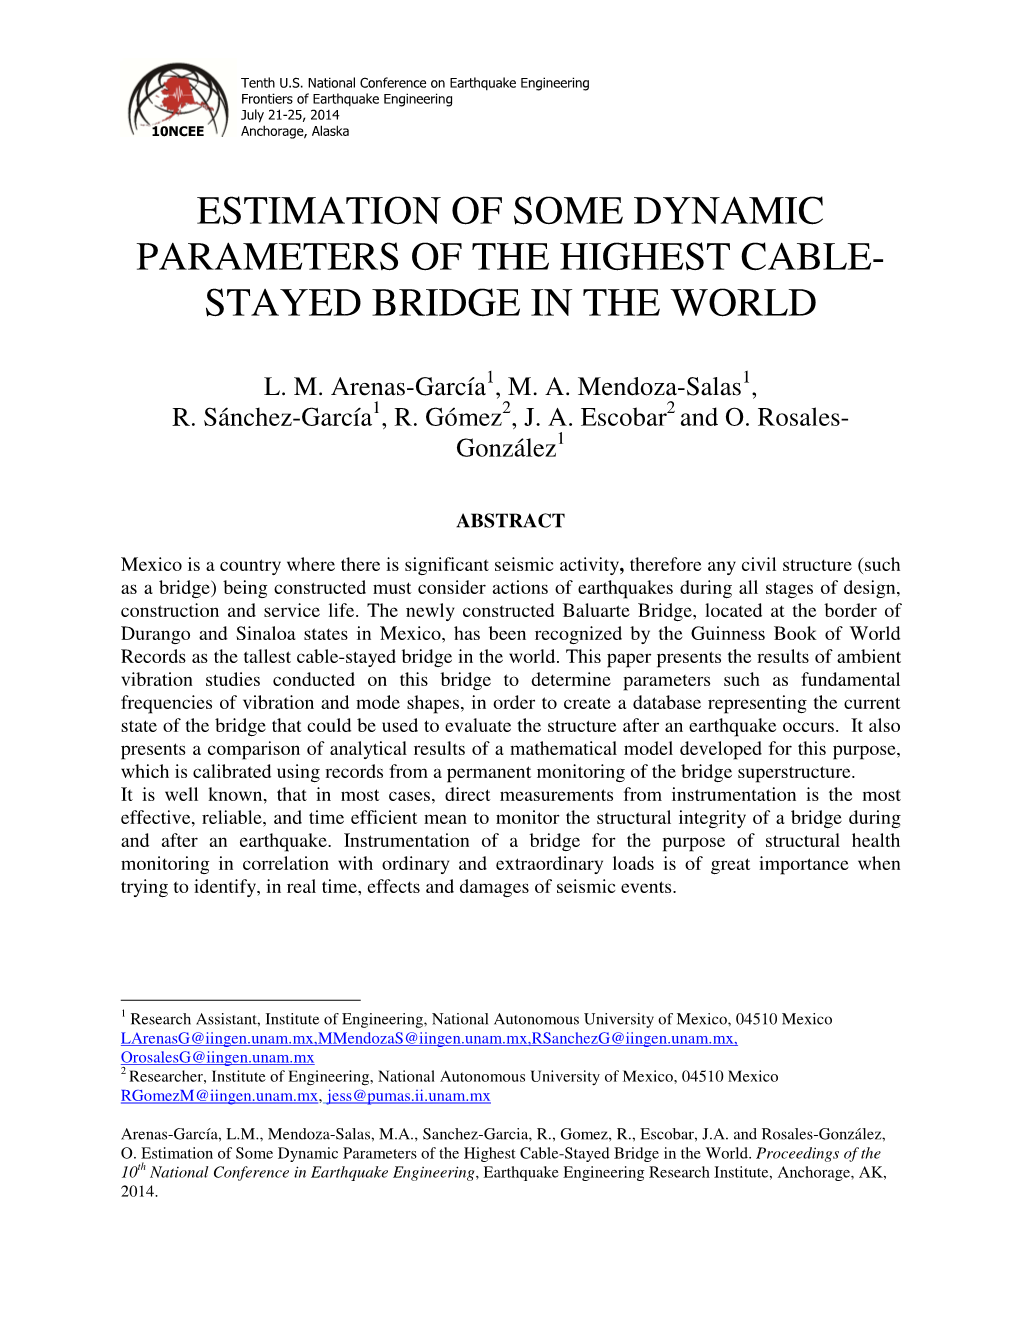 Estimation of Some Dynamic Parameters of the Highest Cable- Stayed Bridge in the World